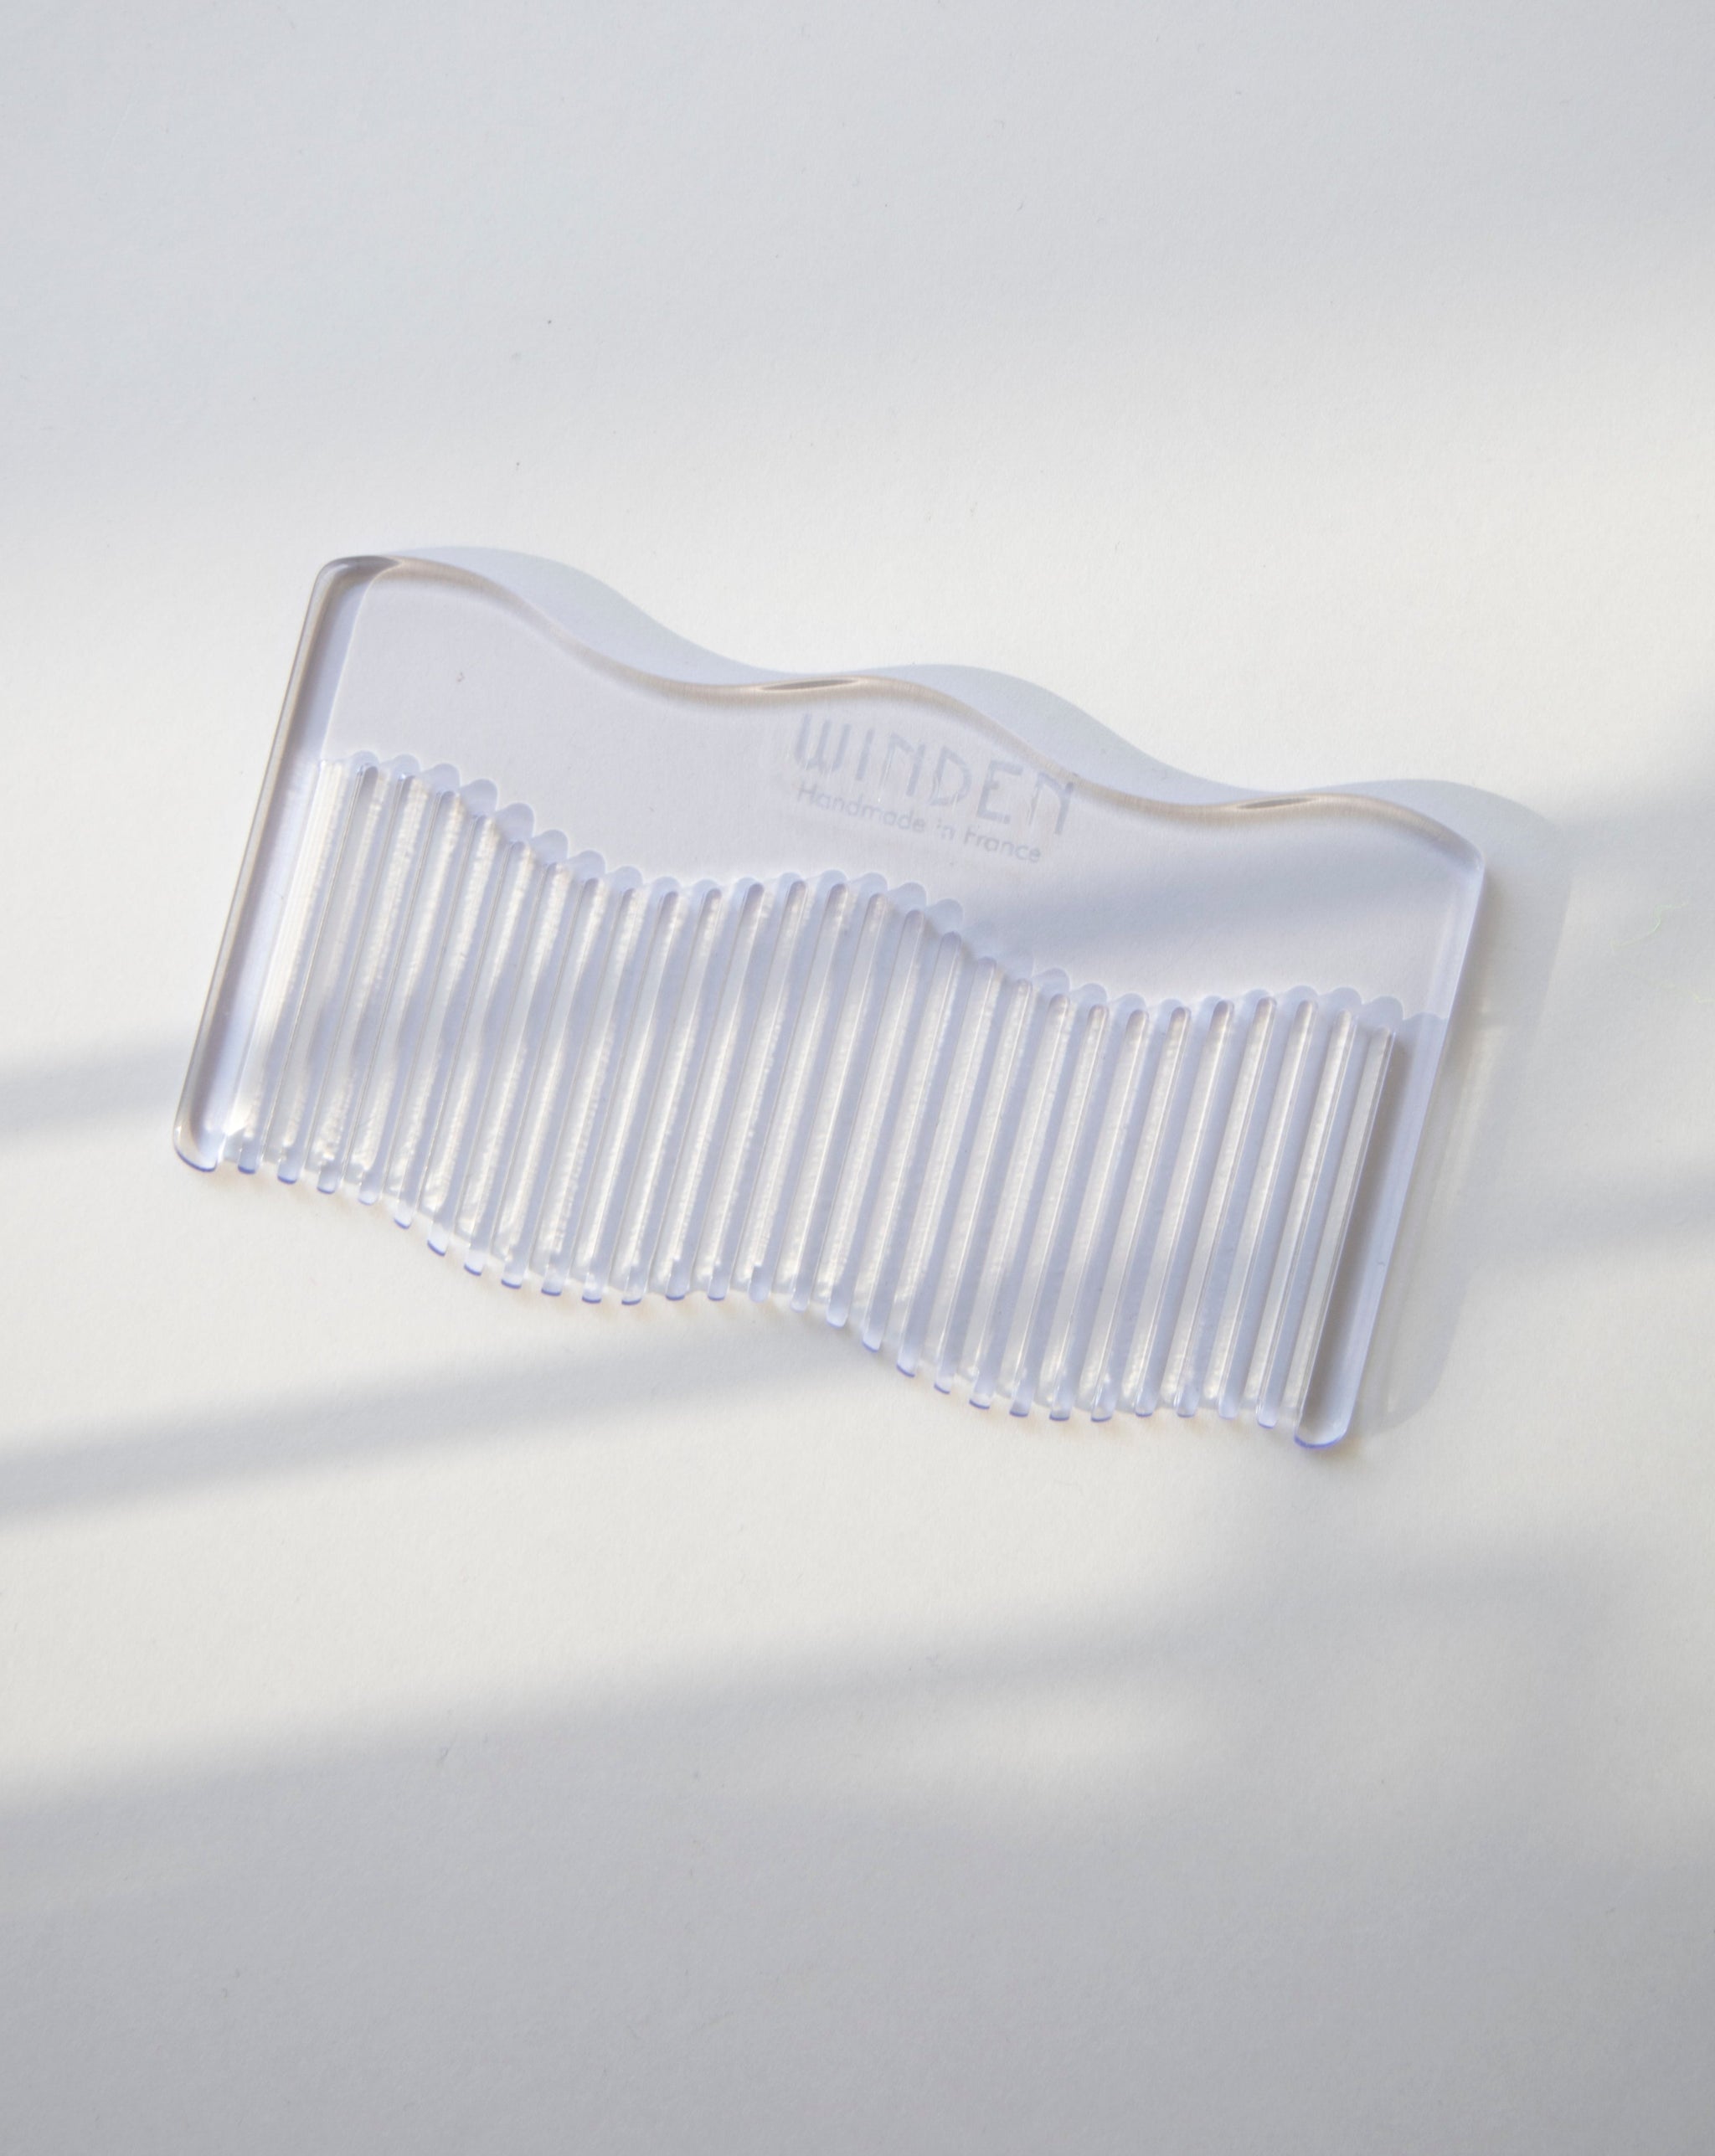 Winden Bowie Travel Comb in Crystal available at Ease Toronto